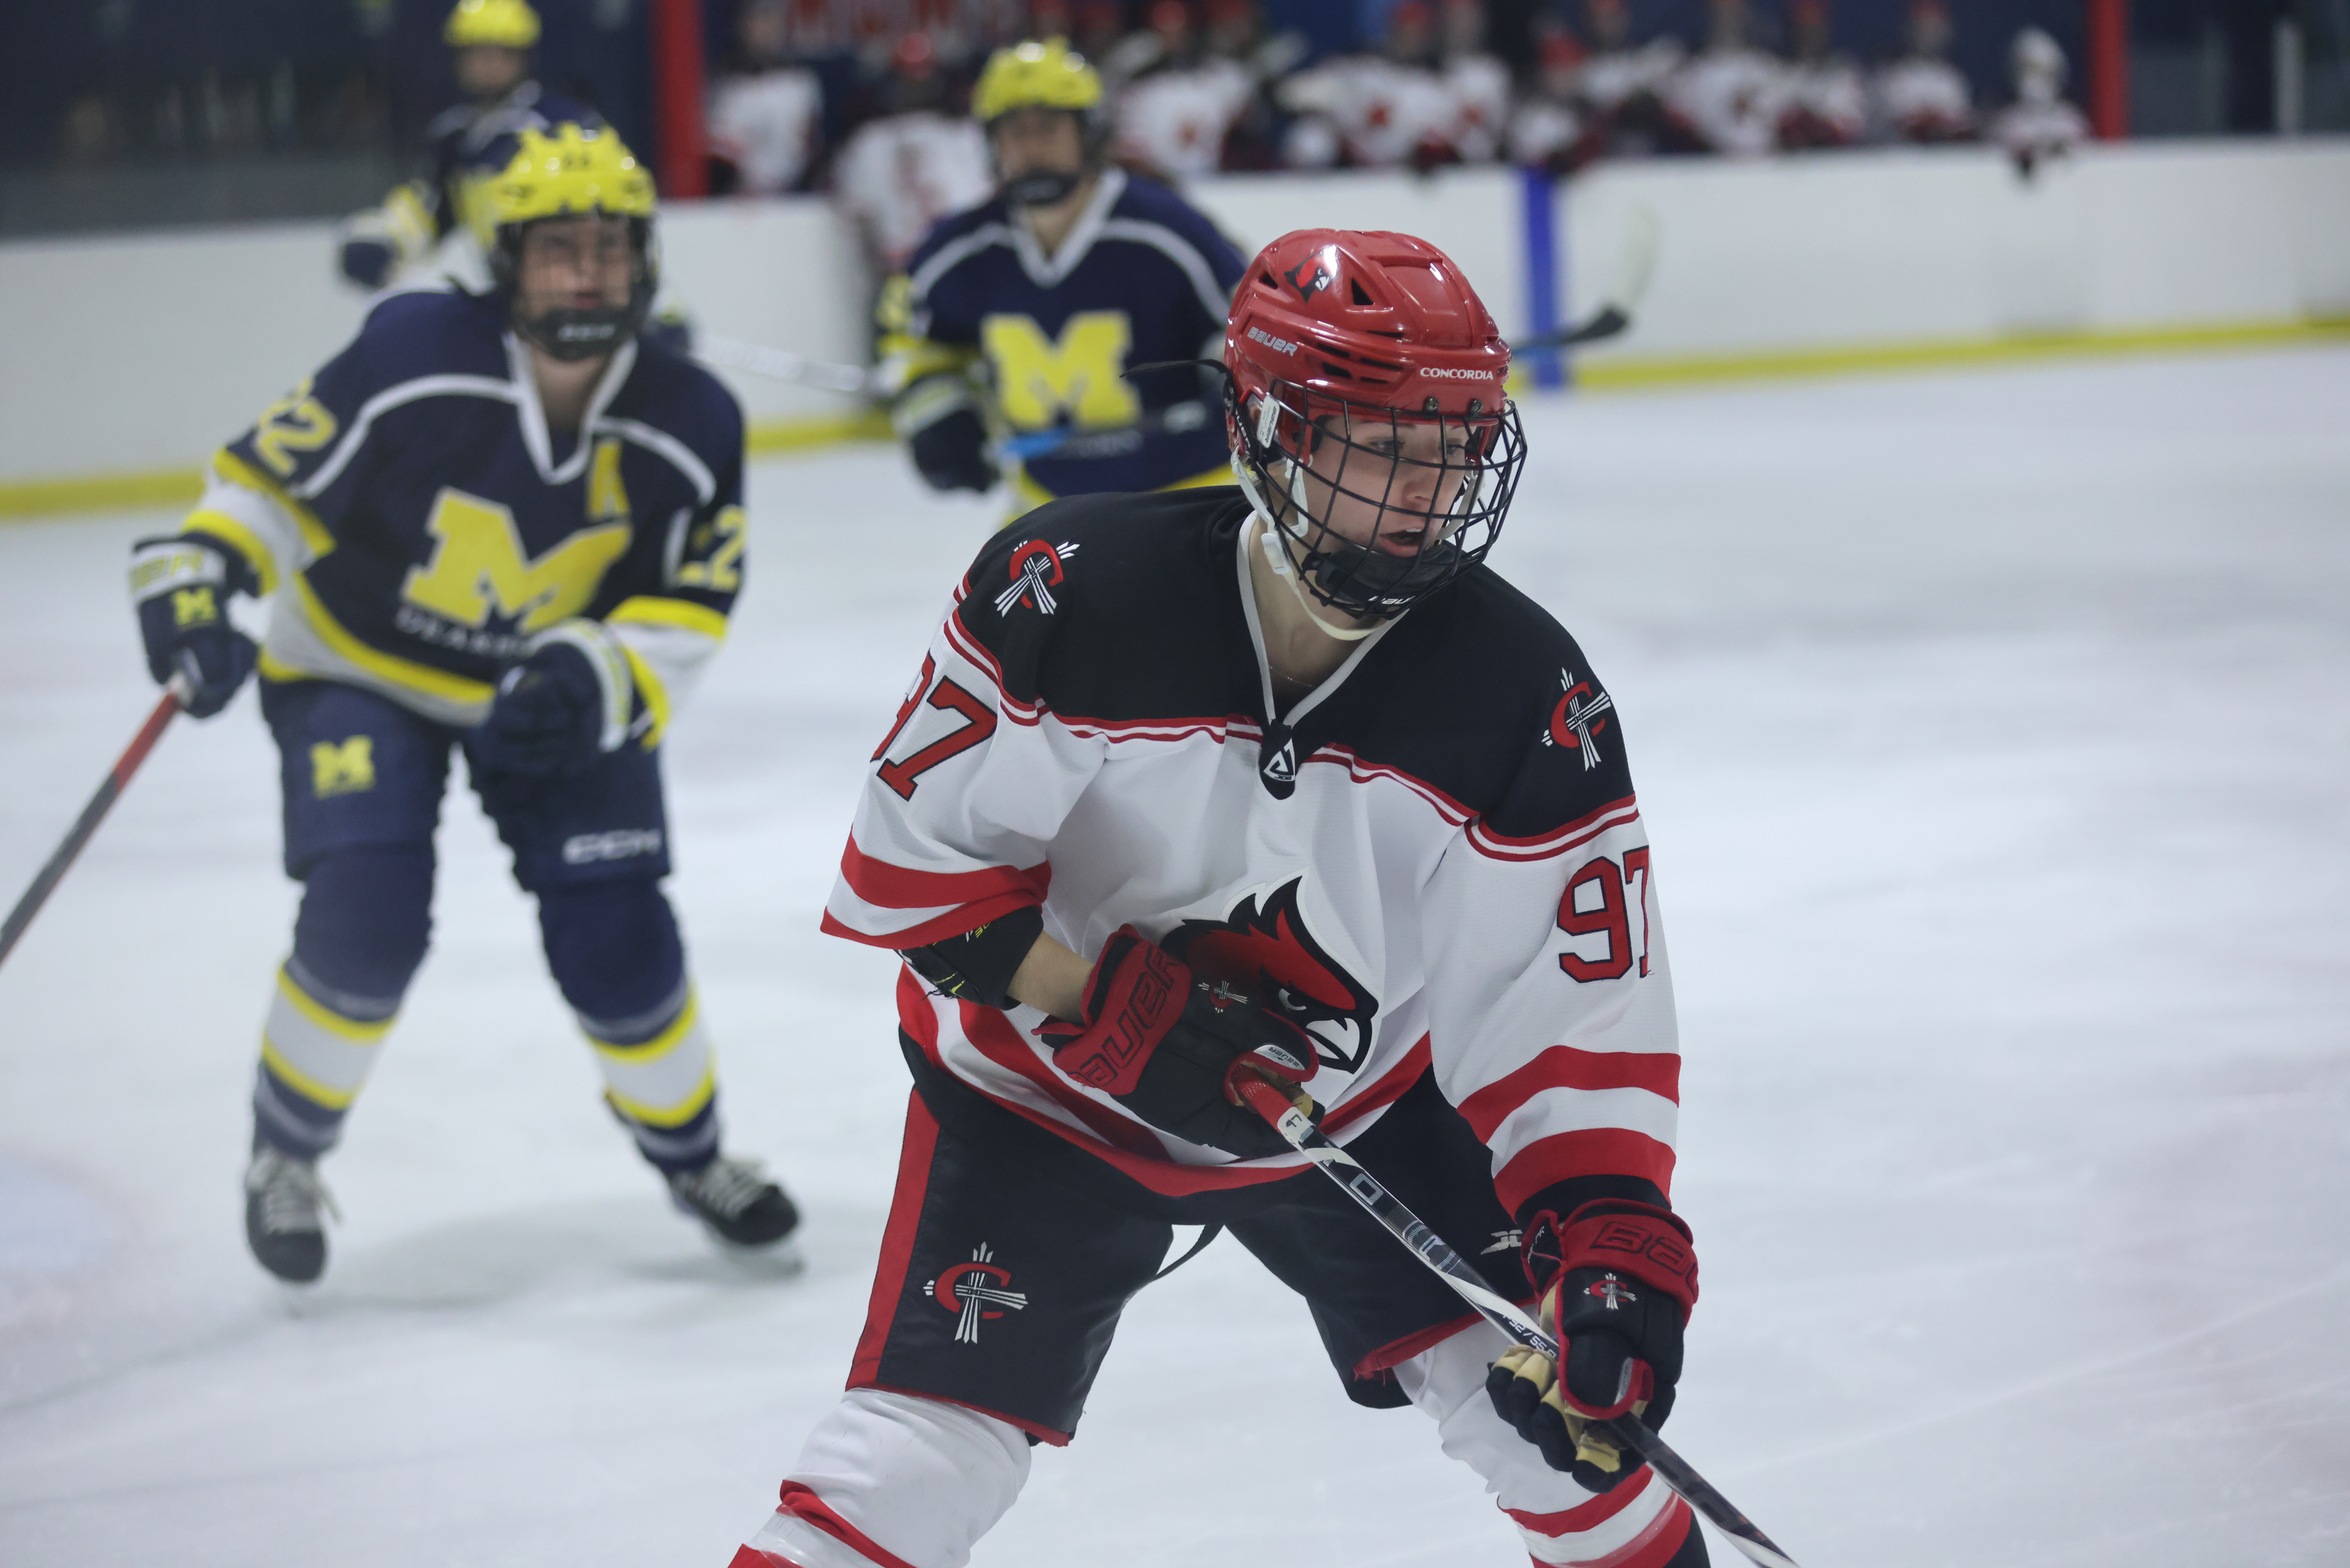 Women's Hockey surges past Aquinas with pair of third period goals